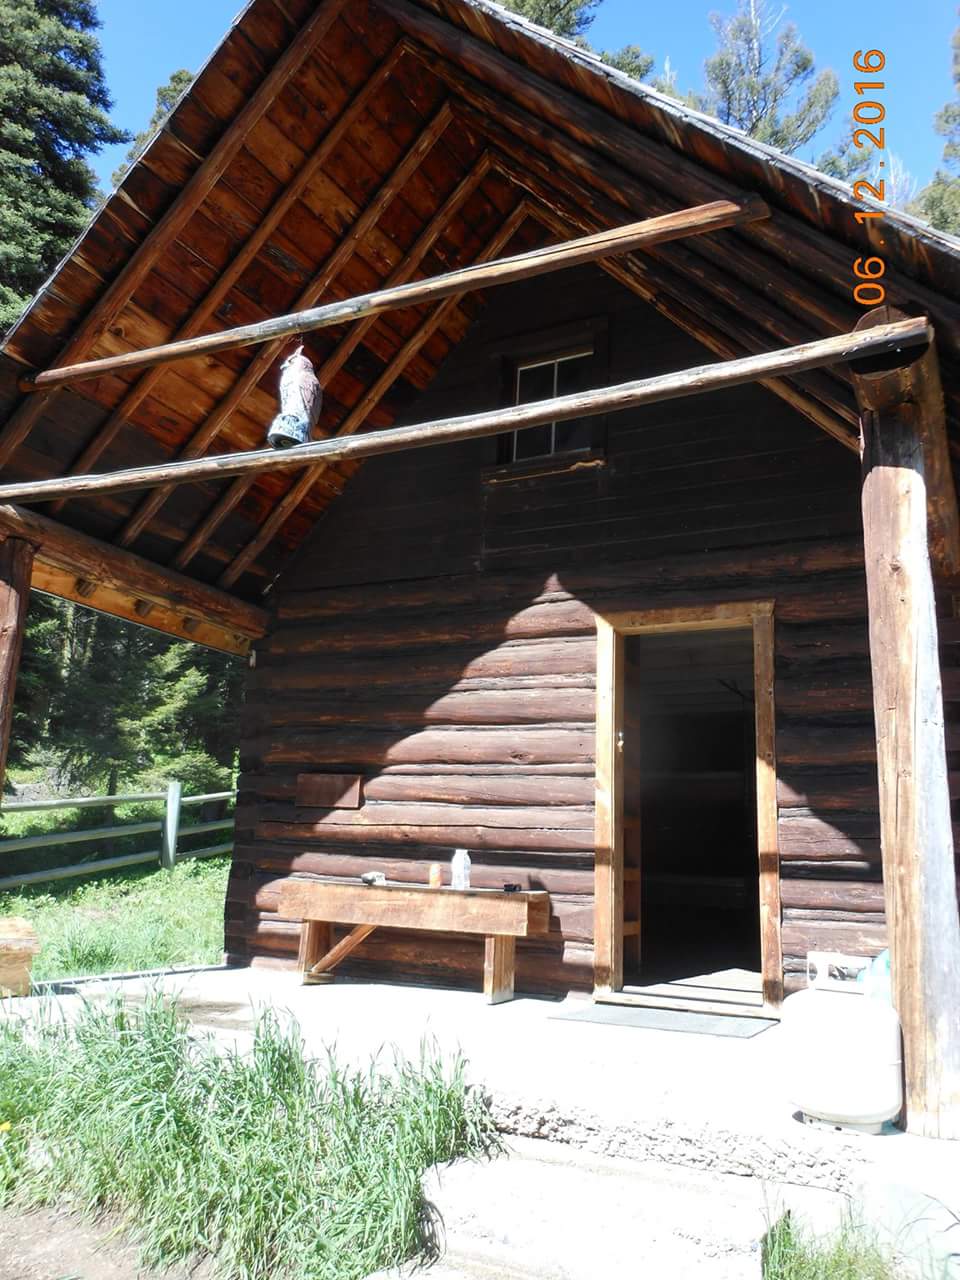 This cabin was originally built I believe in 1908 and moved to its current location in 1944.